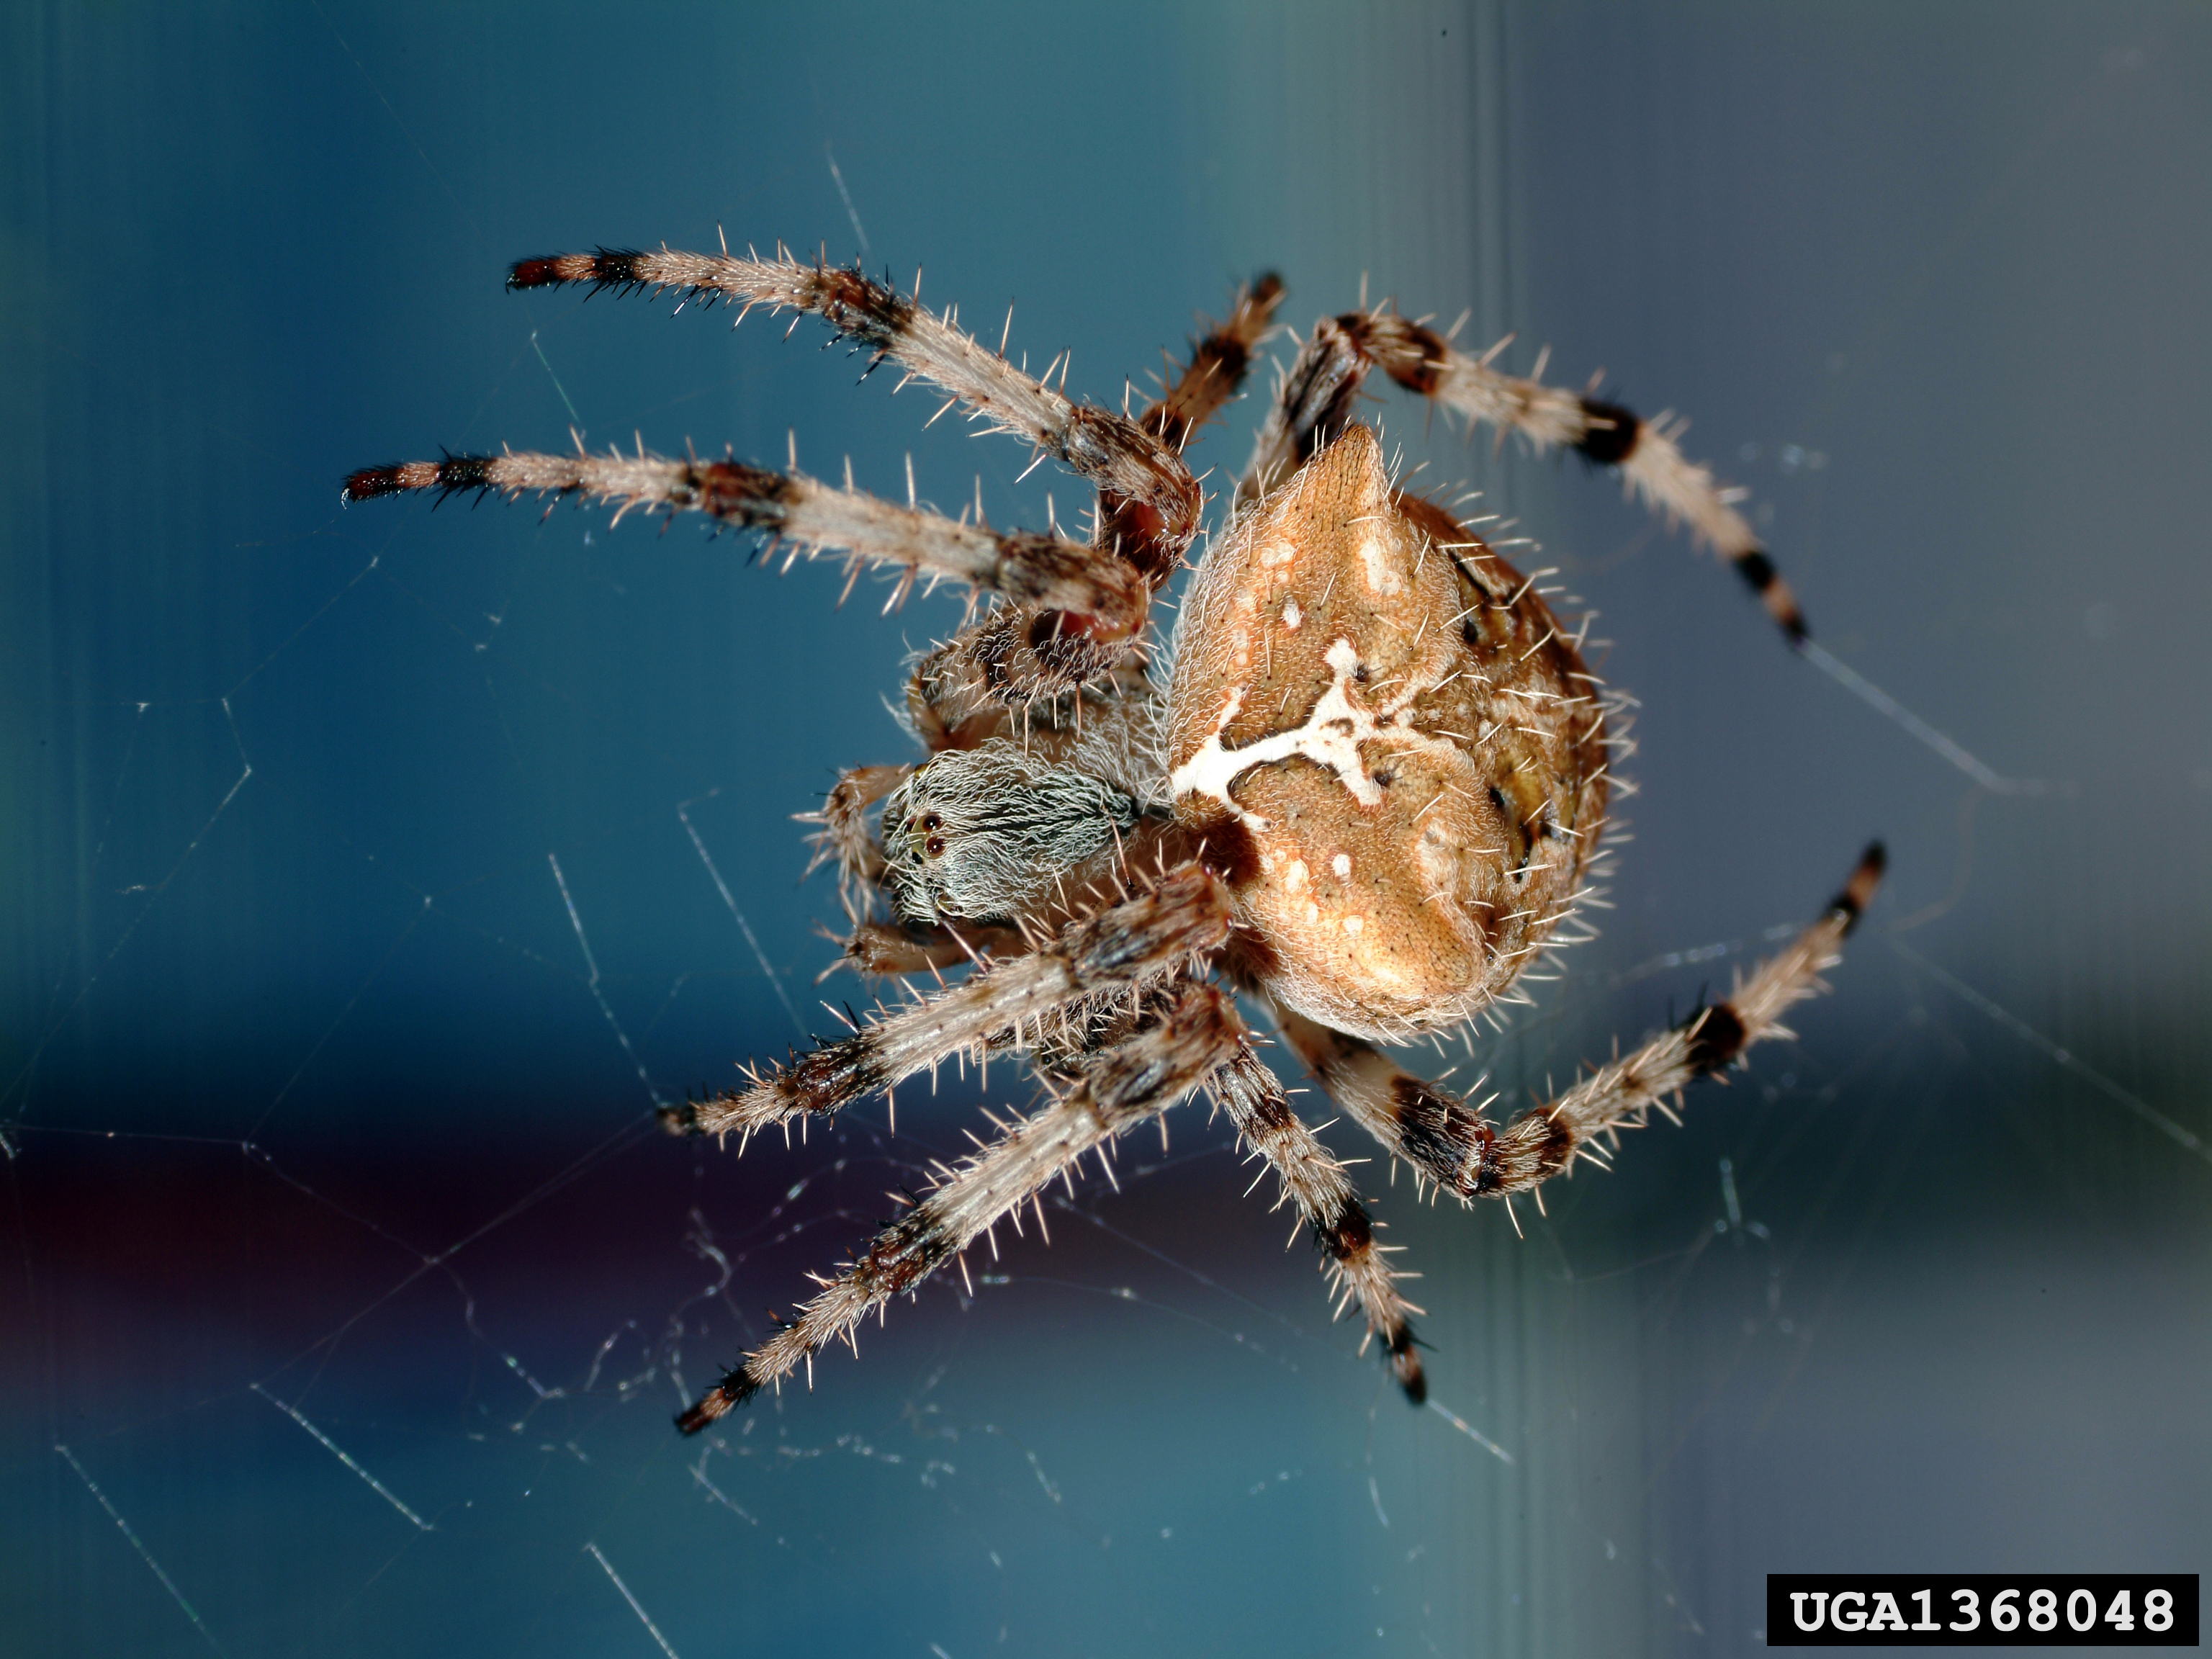 Identifying different types of spiders